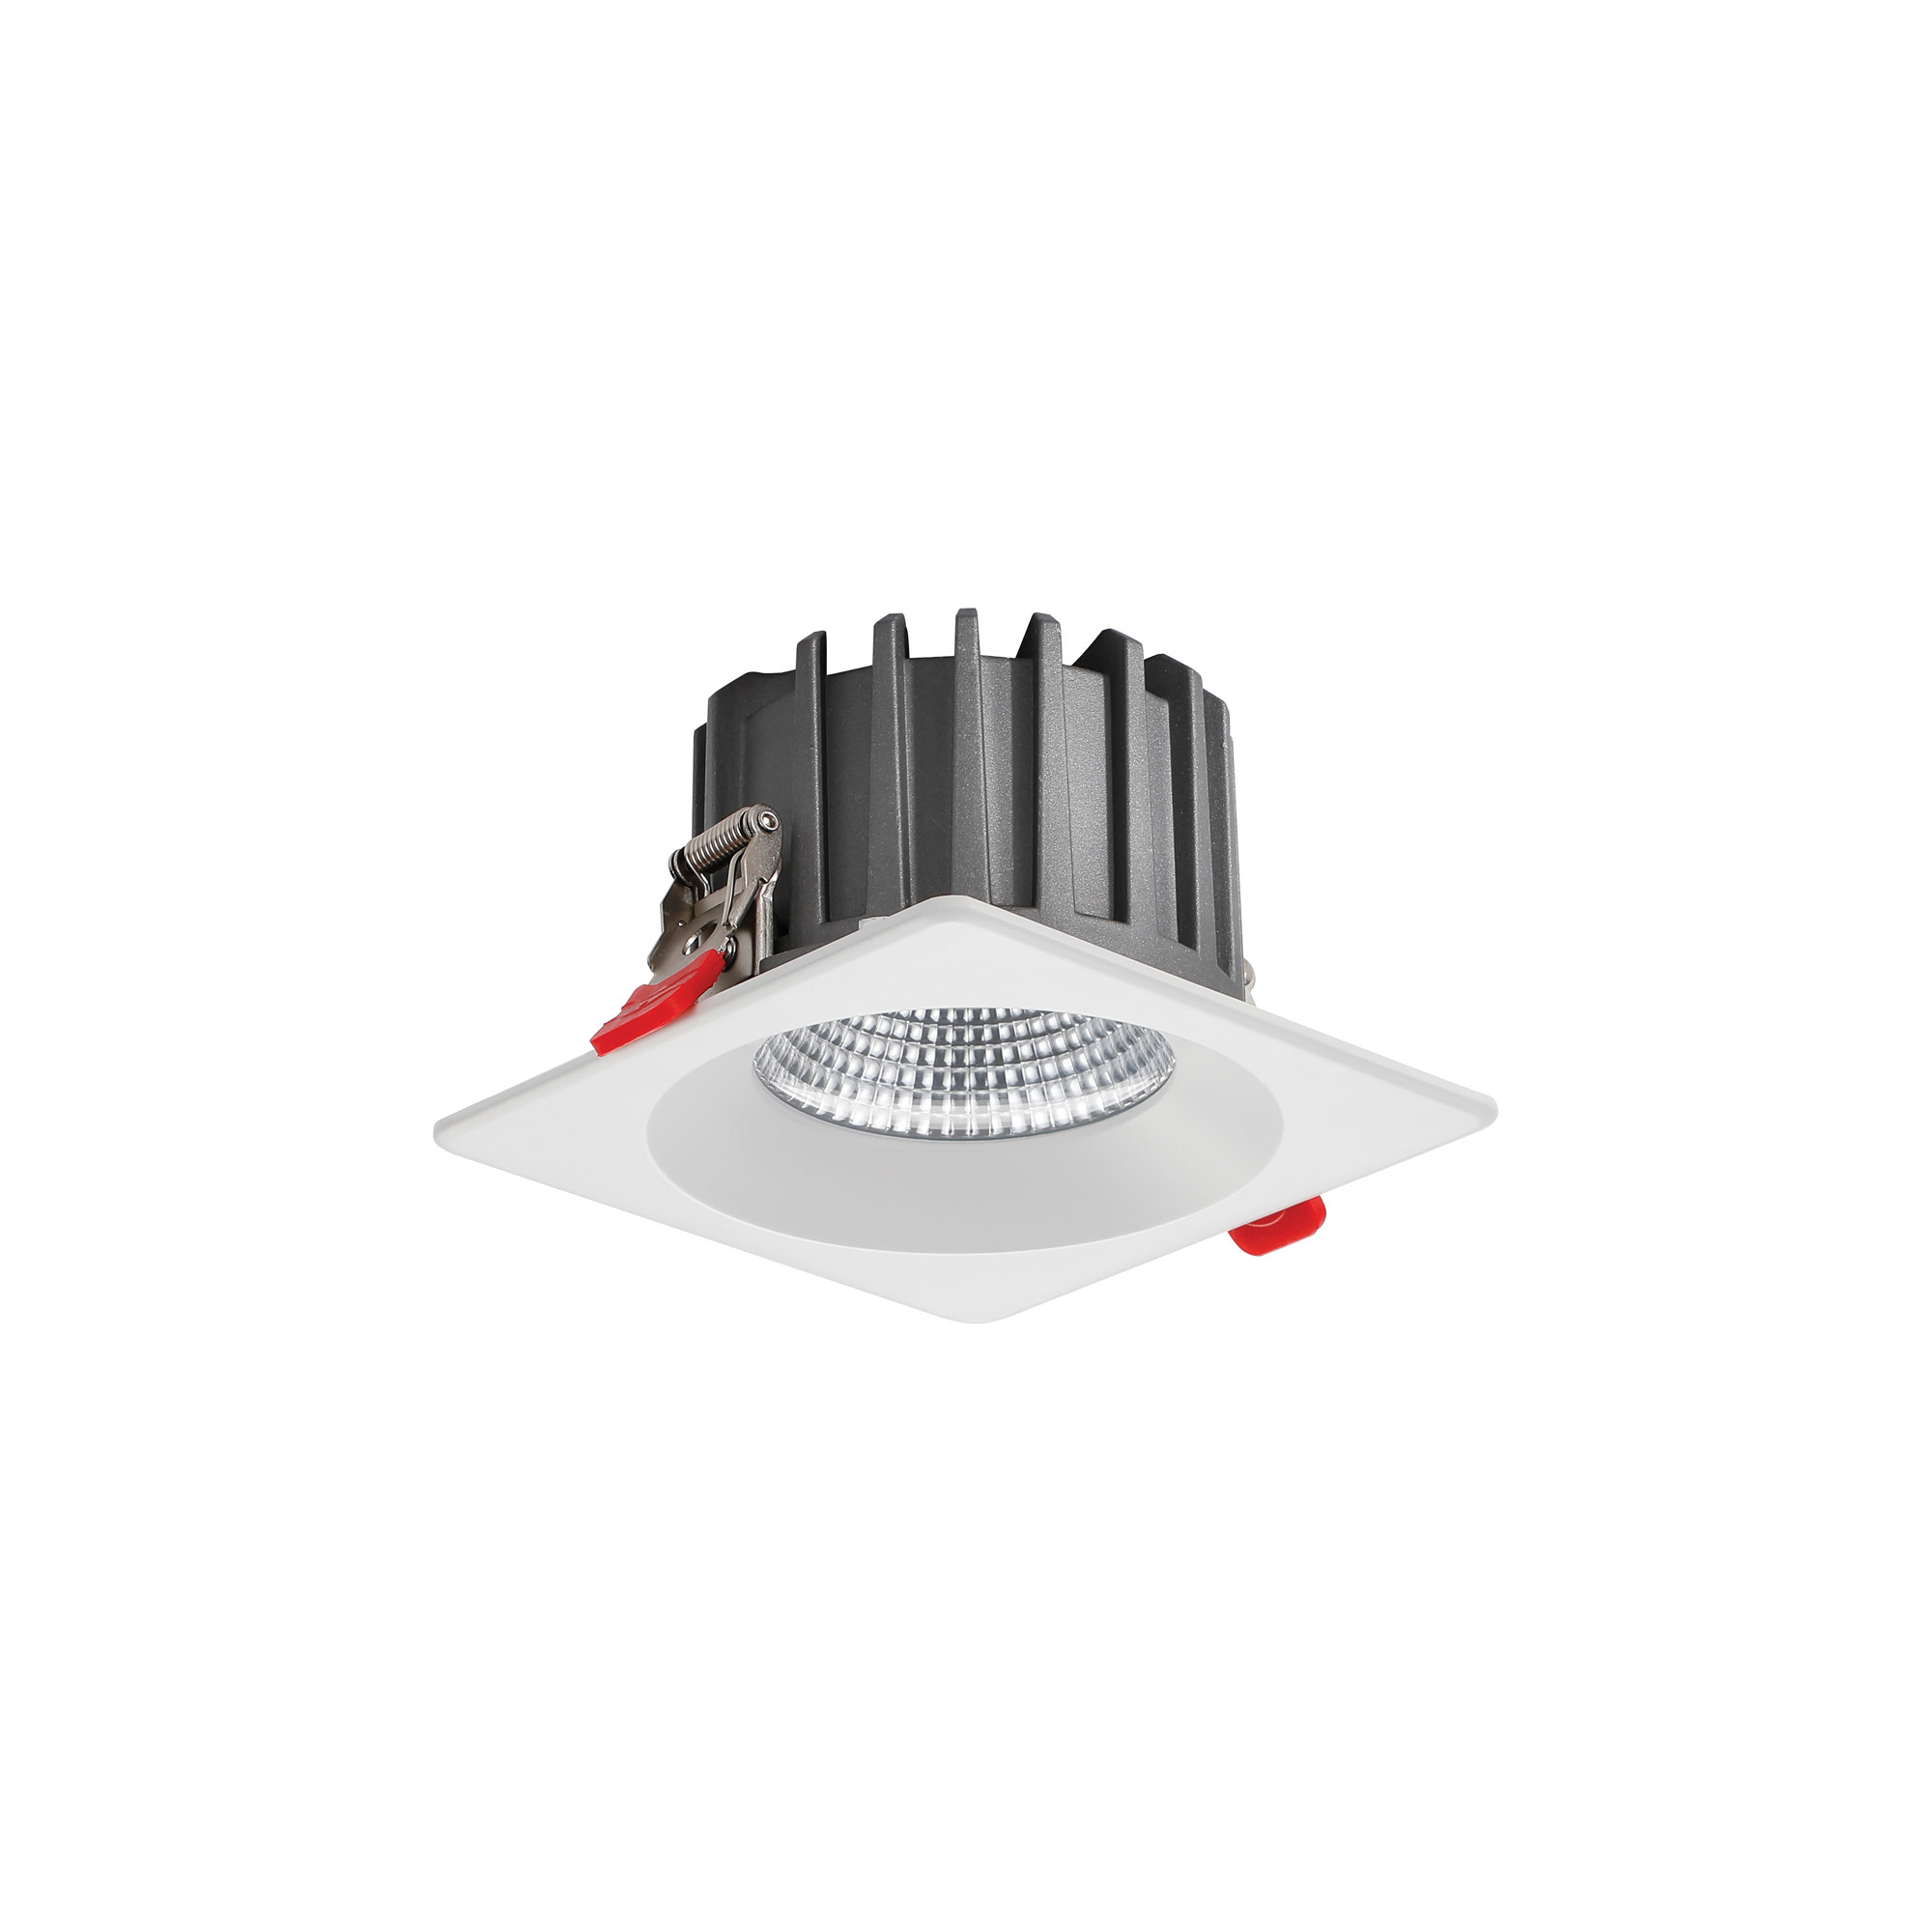 DL200072  Bionic 15; 15W; 350mA; White Deep Square Recessed Downlight; 1200lm ;Cut Out 120mm; 40° ; 5000K; IP44; DRIVER INC.; 5yrs Warranty.